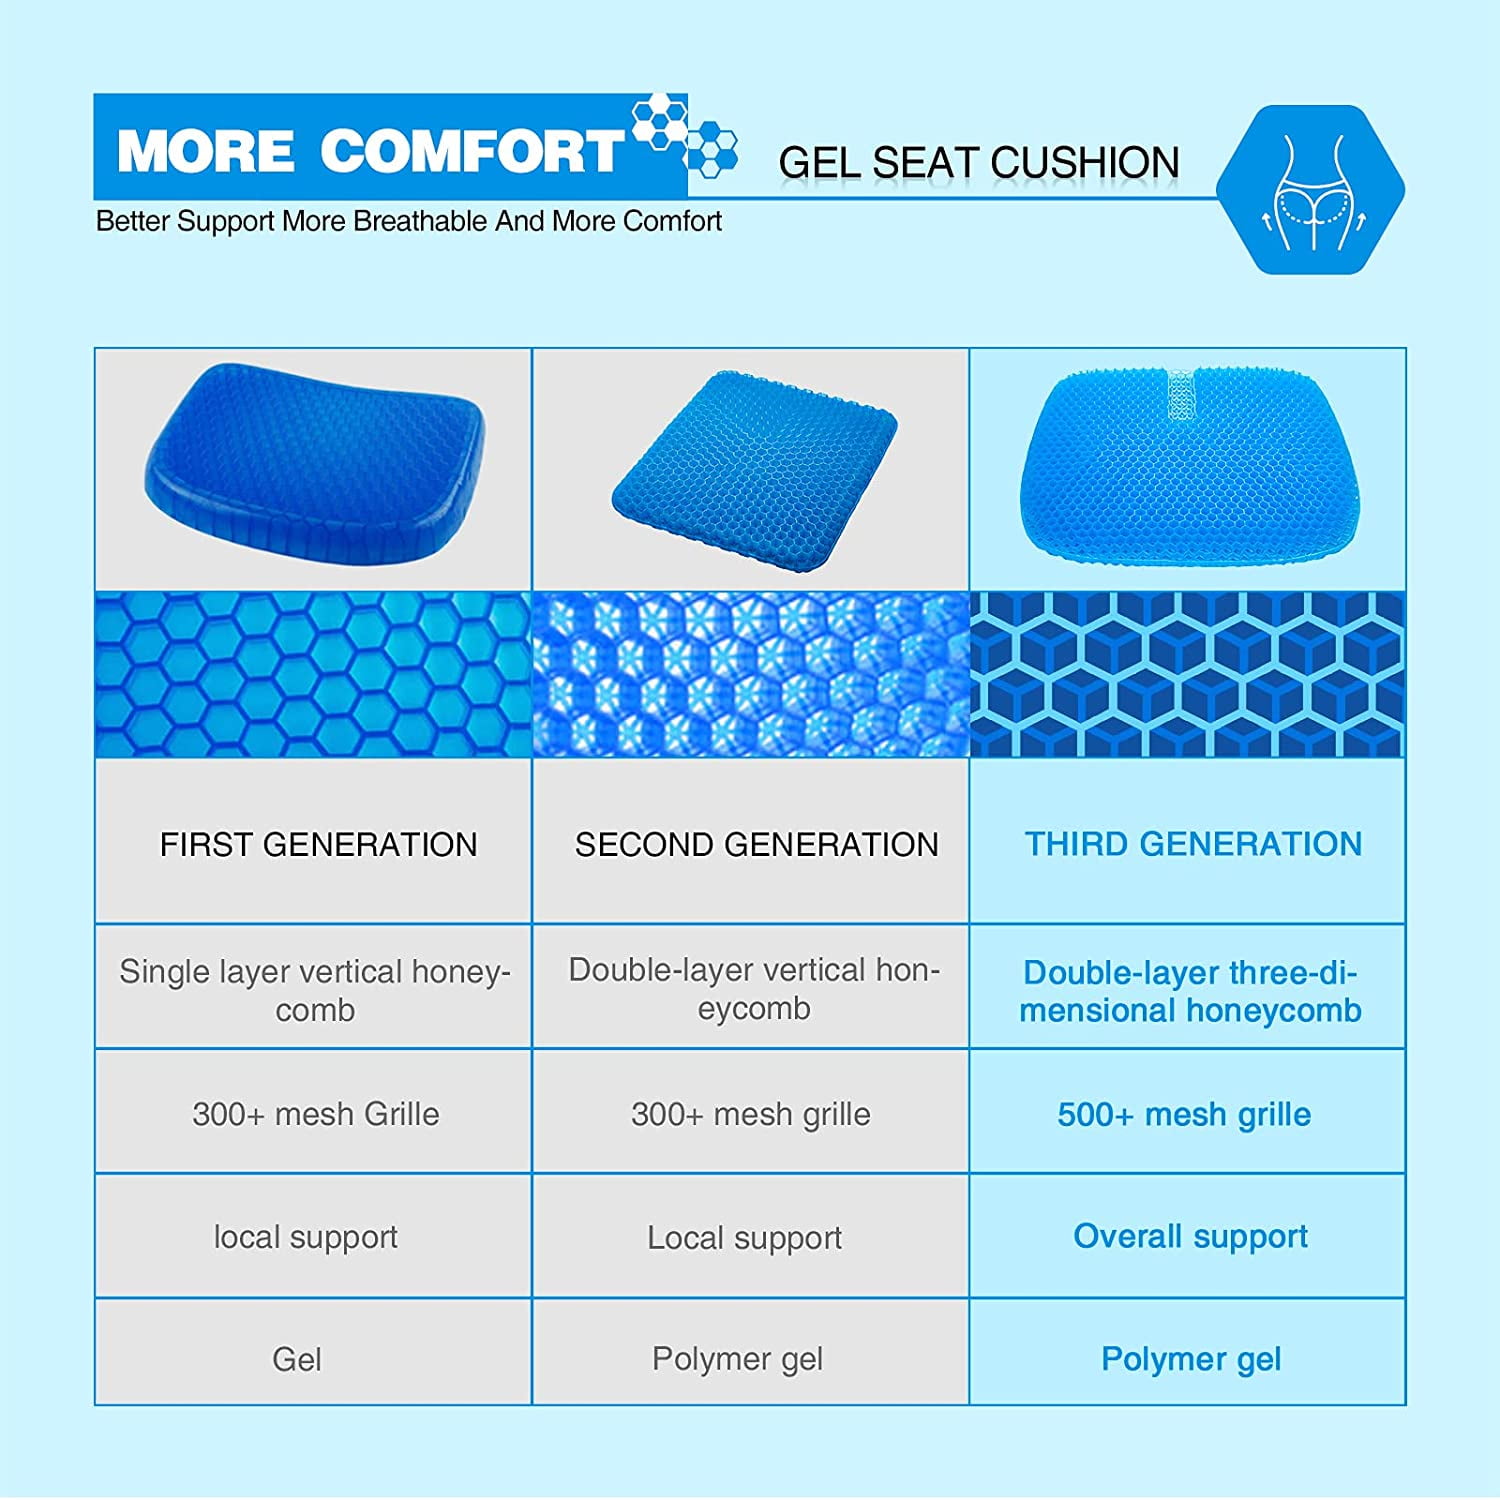 Double Layer Egg Gel Cushion for Pain Relief Double-Sided Seat Cushion for The Car,Office,Wheelchair Extra Large Gel Seat Cushion Breathable with Non-Slip Cover for Pressure Relief 